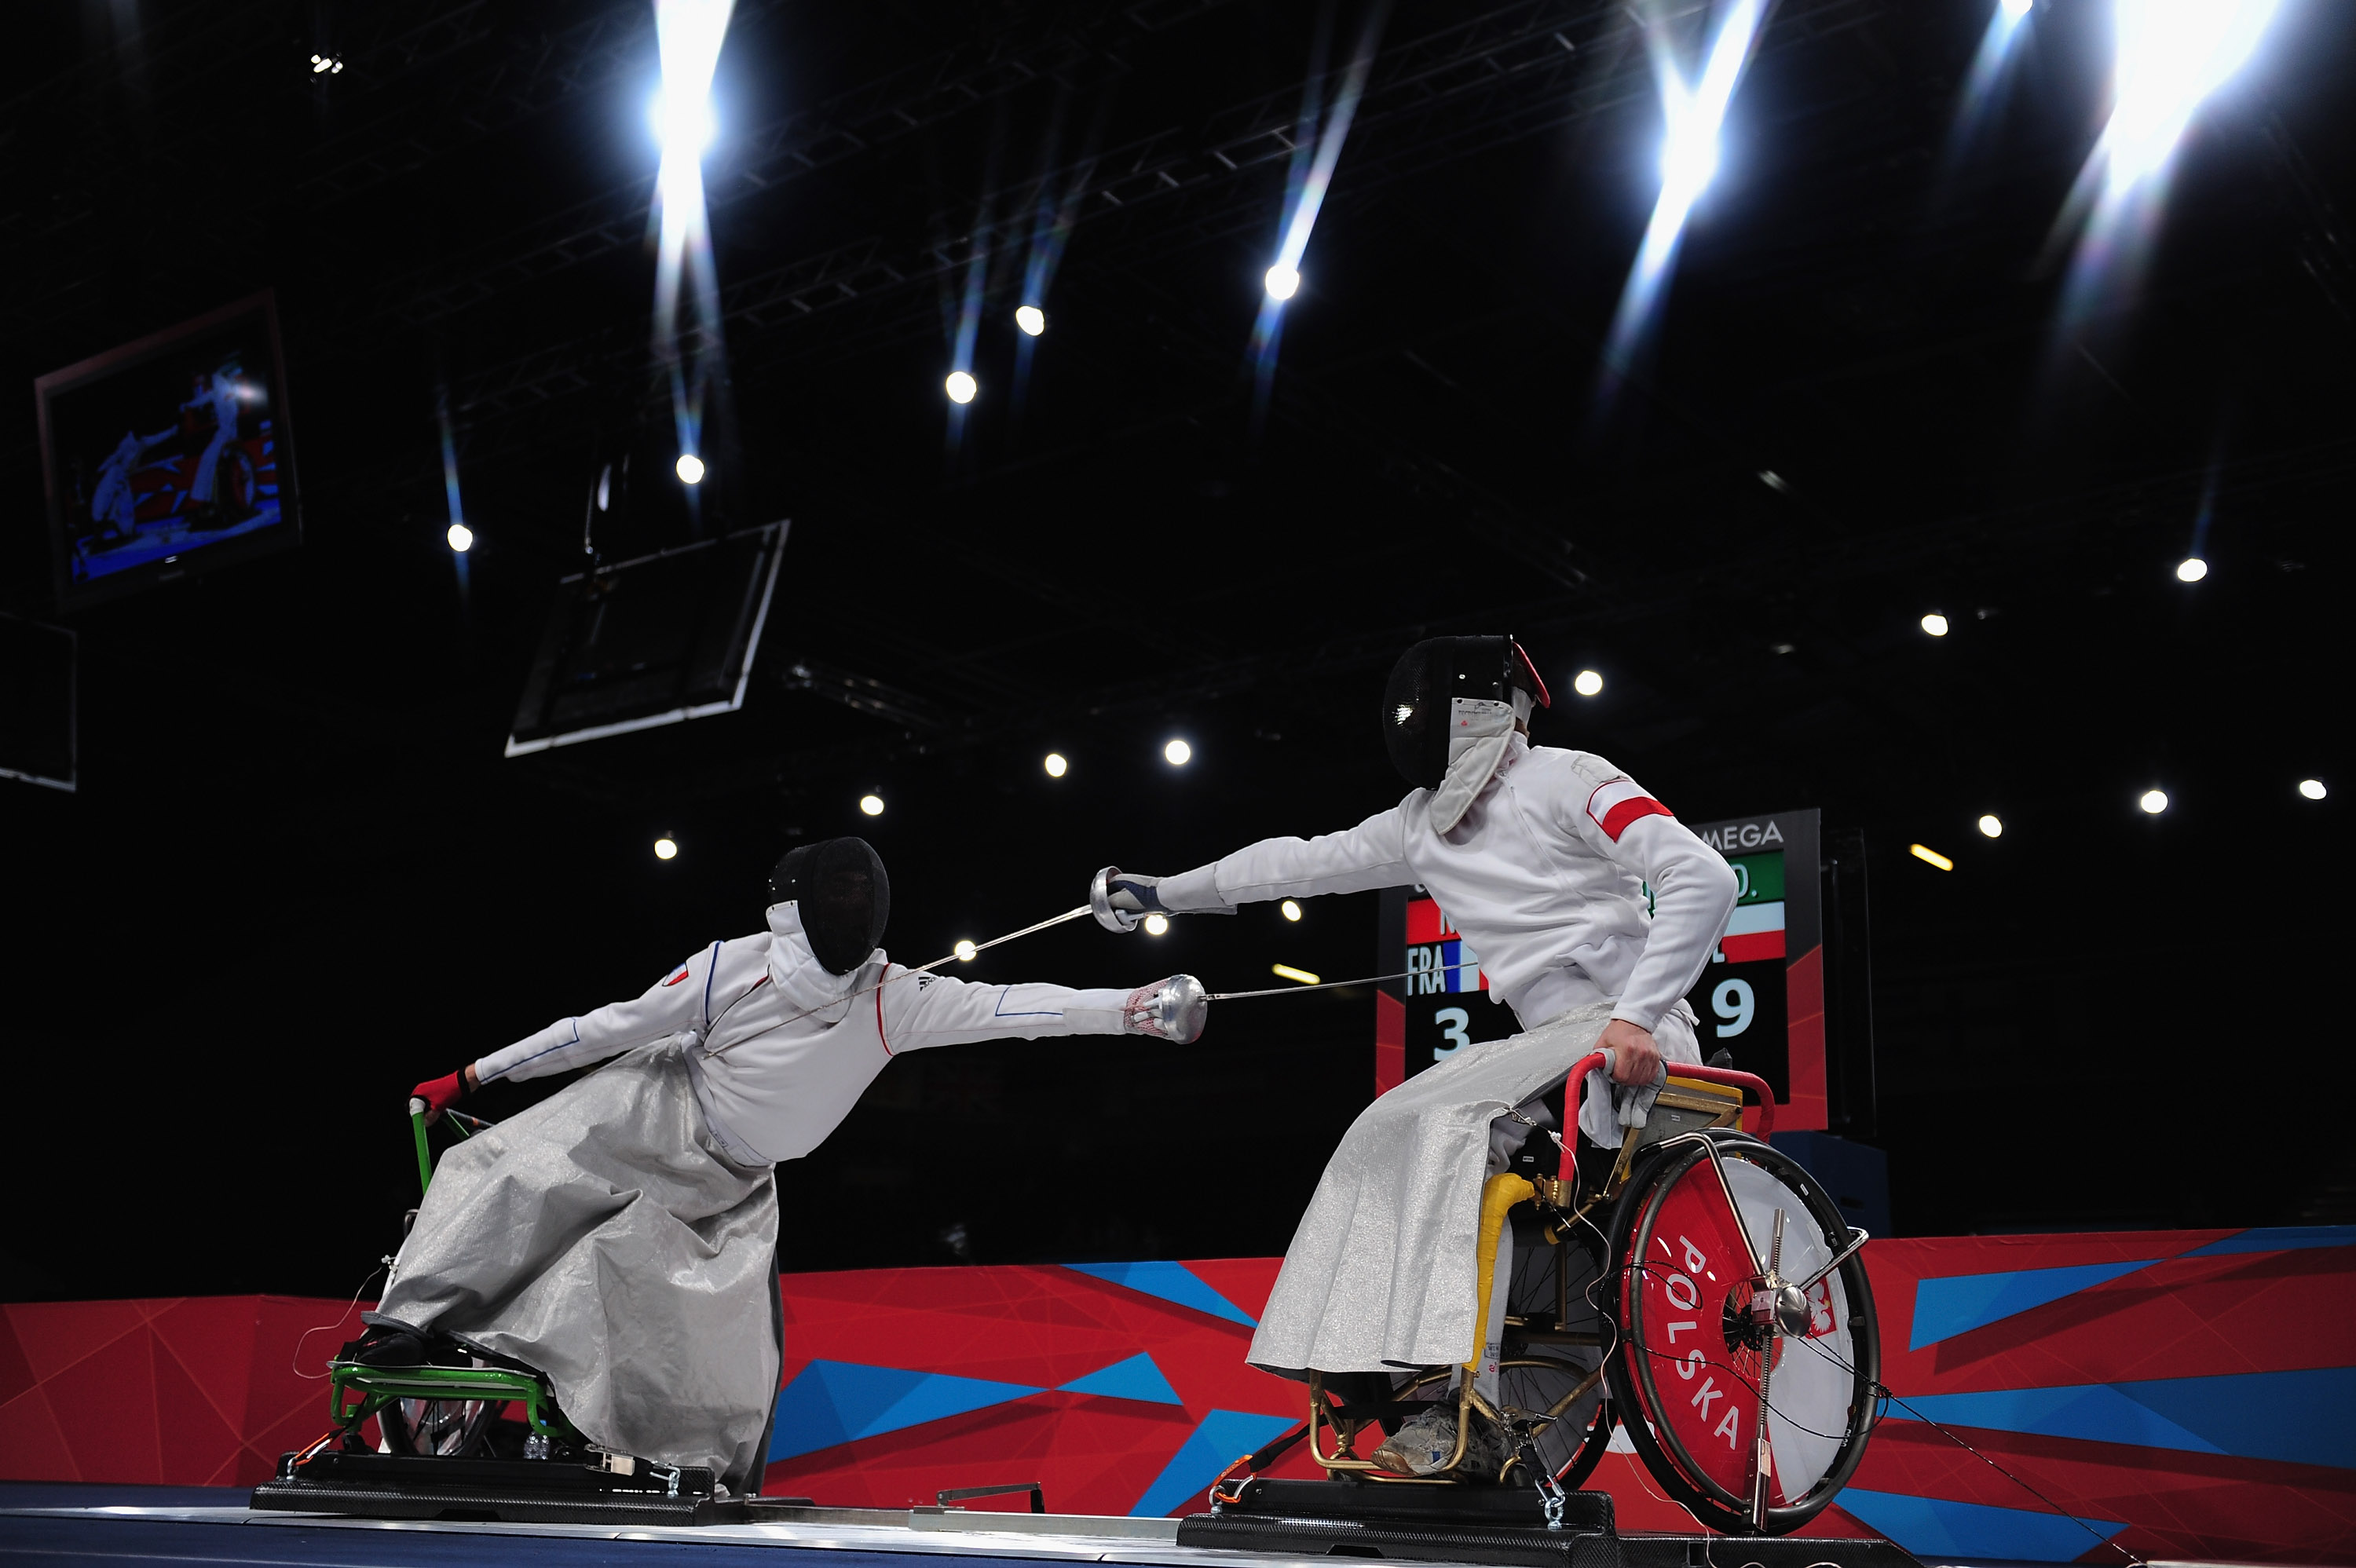 Warsaw, Poland gears up for IWAS Wheelchair Fencing World Cup